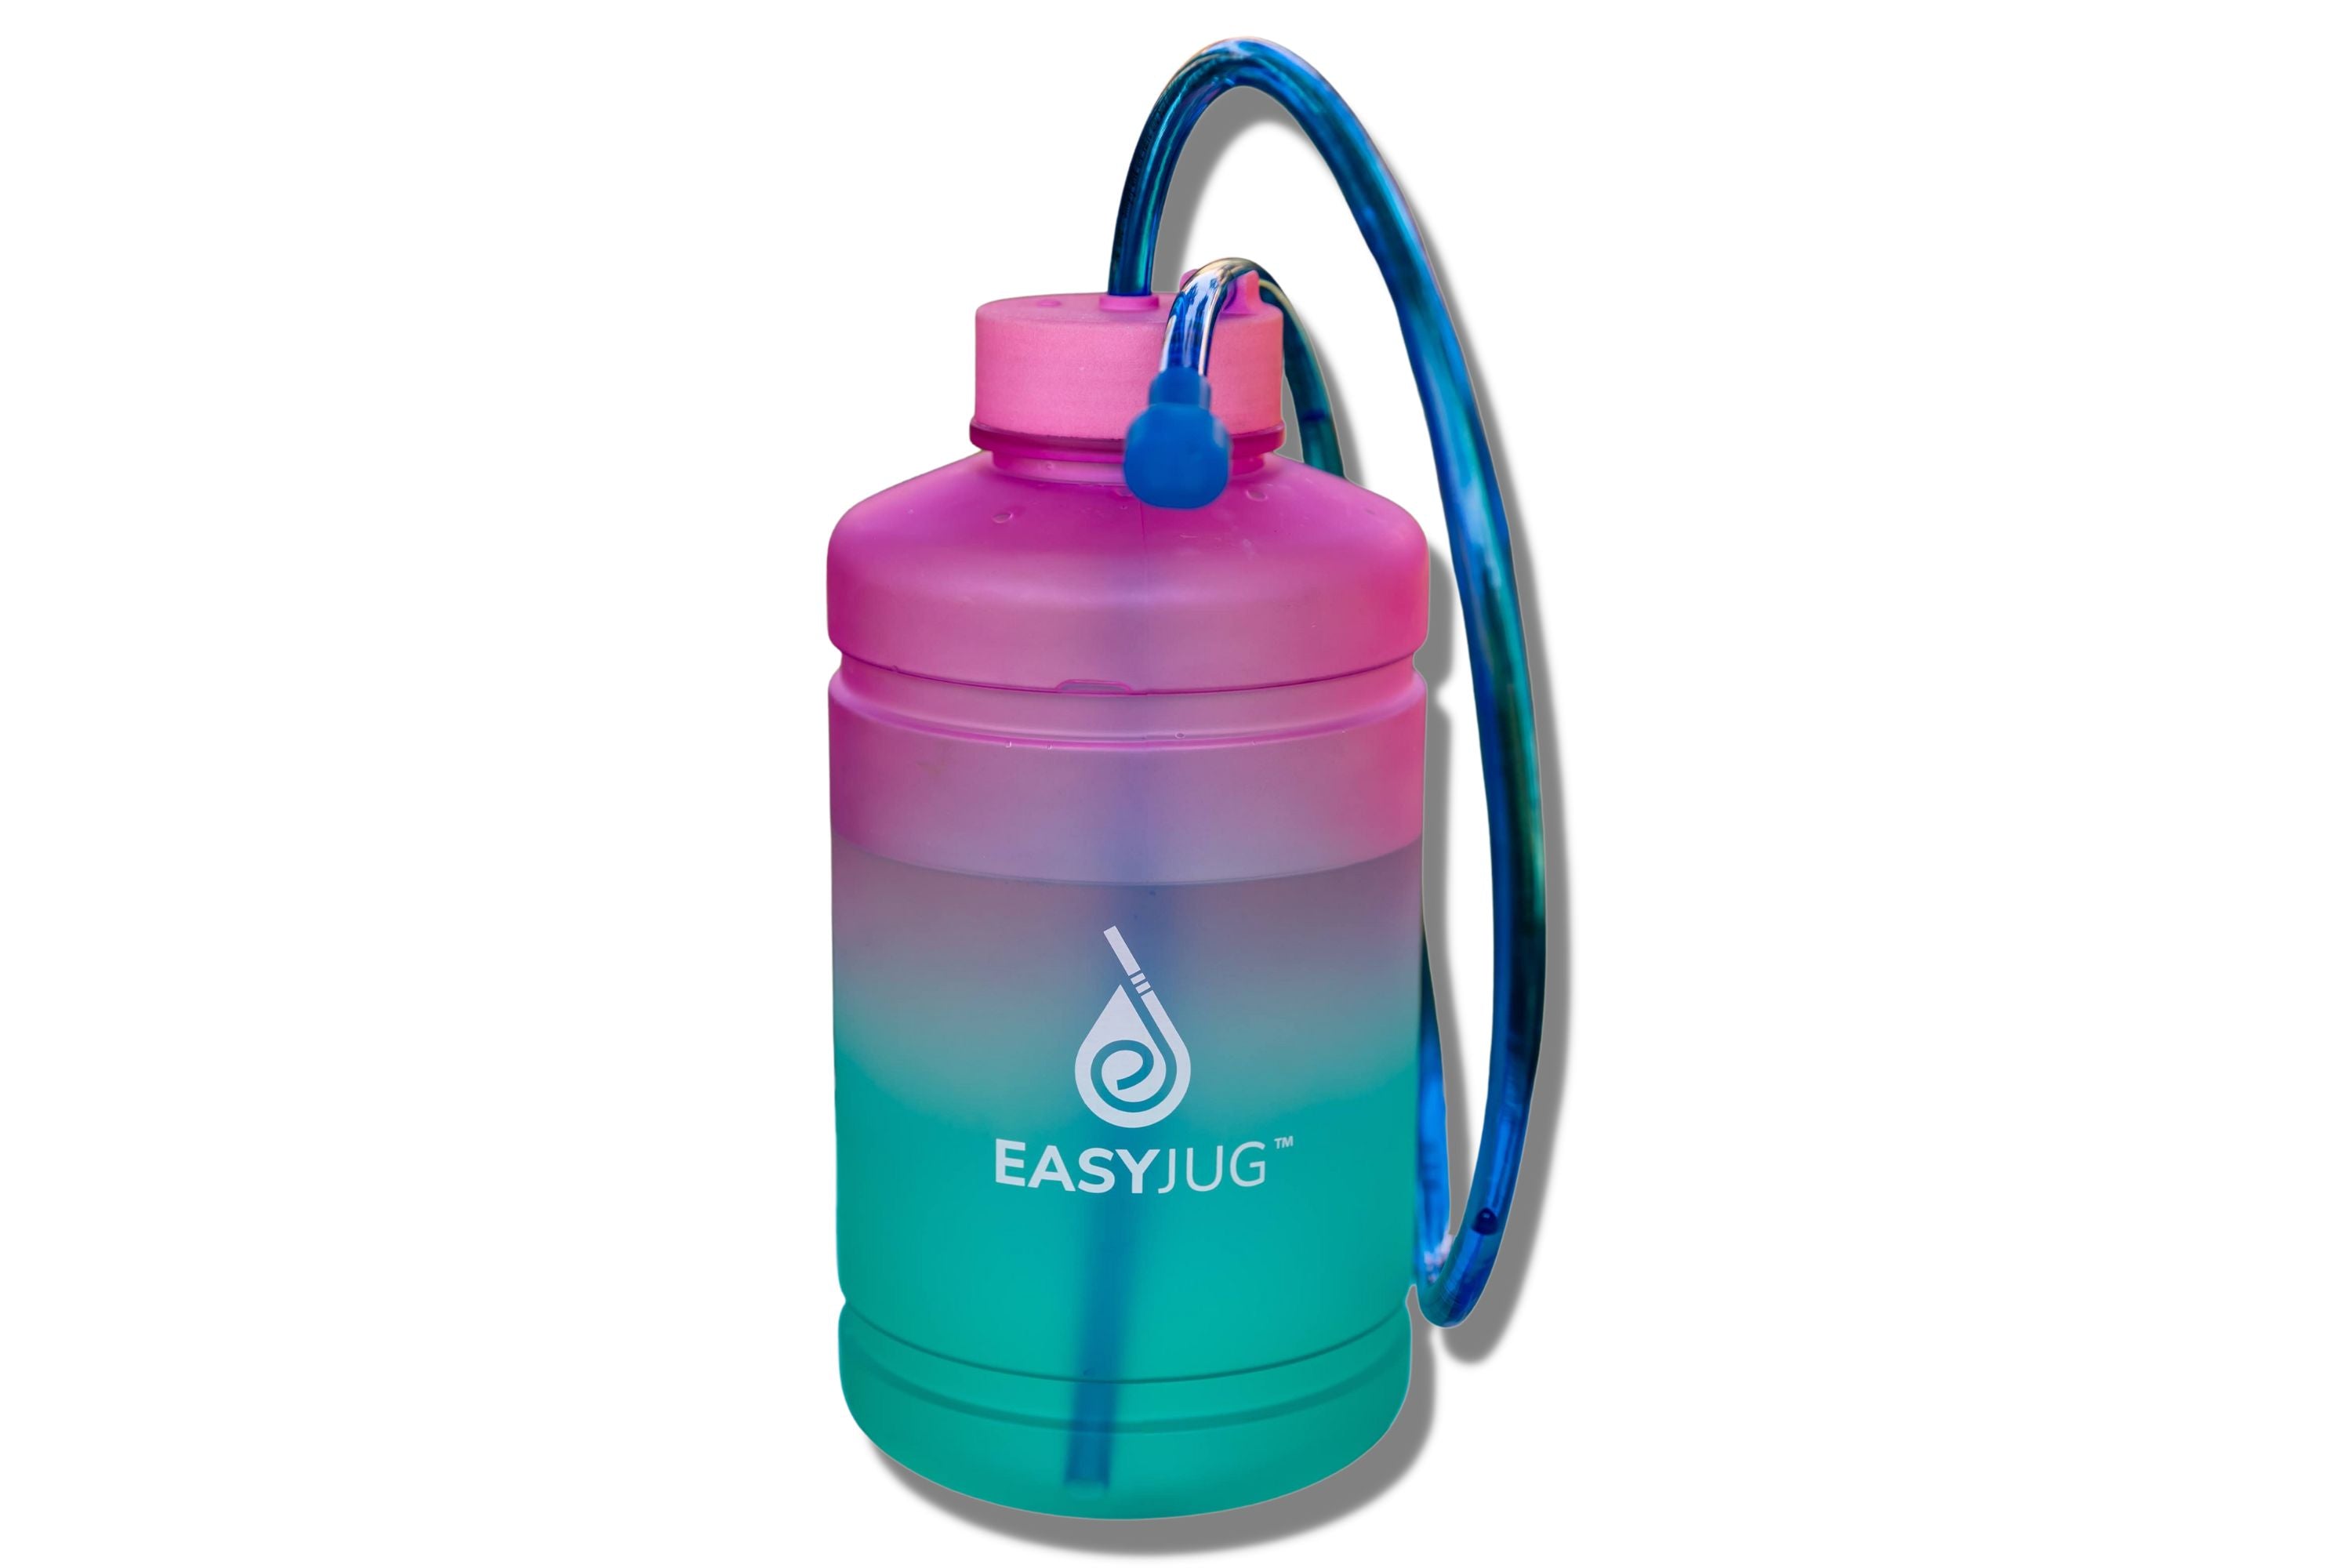 HydroJug - Straw re-stock coming soon! Join our email list to find out  when!